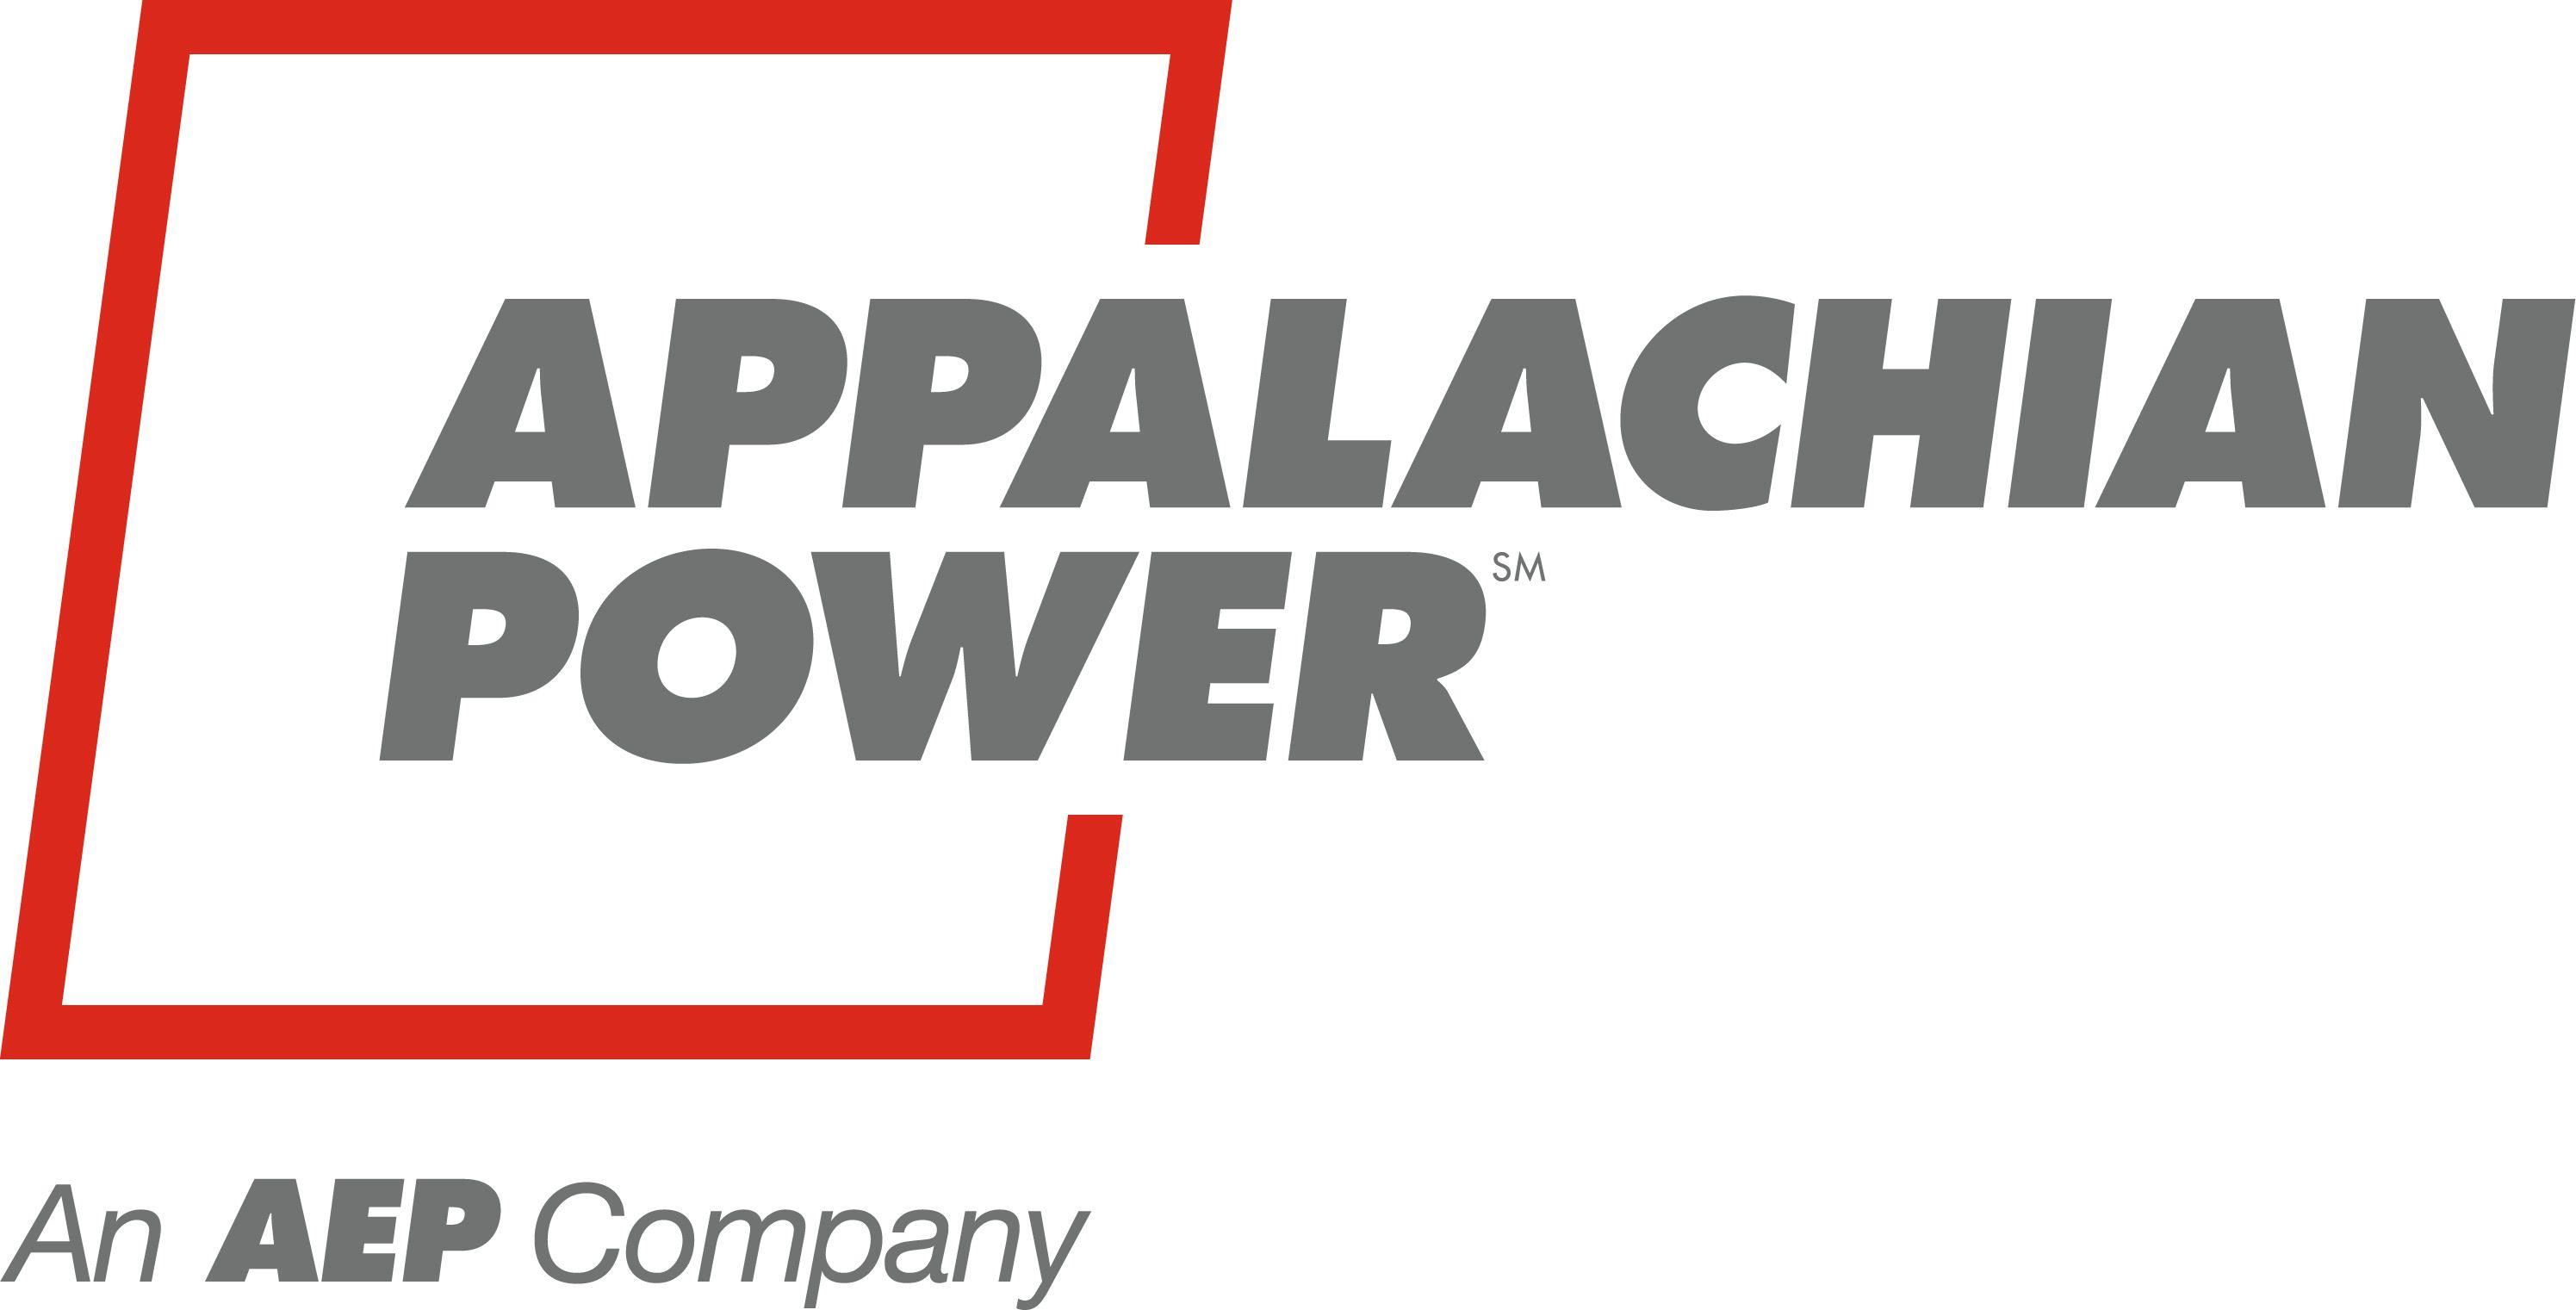 American Electrical Power Company Logo - Sons and daughters of Appalachian Power employees net Educational ...